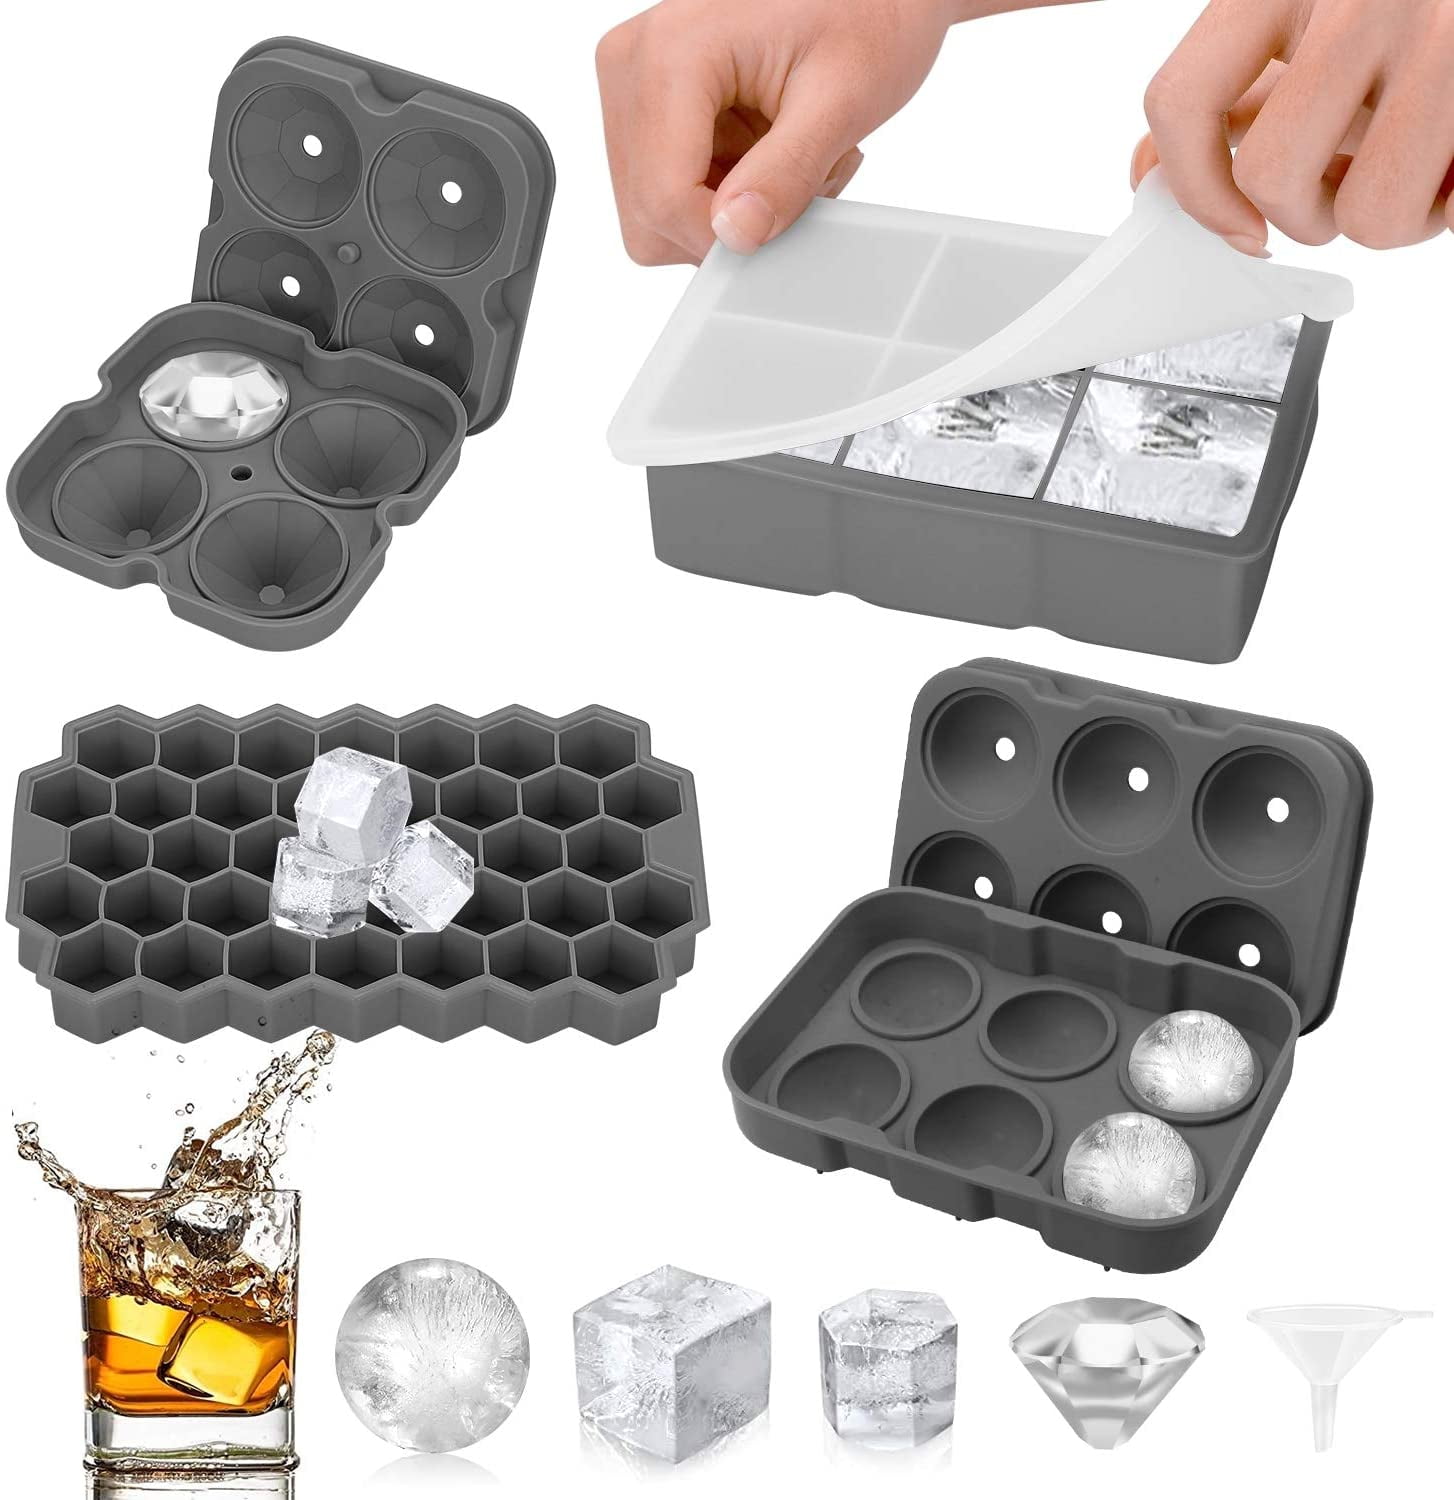 Sycees 2-in-1 Countertop Ice Maker & Shaver Machine, 18 Bullet-Shaped Ice Cubes in 11 Mins, 44lbs High Capacity, 6.6lbs Large Storage, Auto/Manual